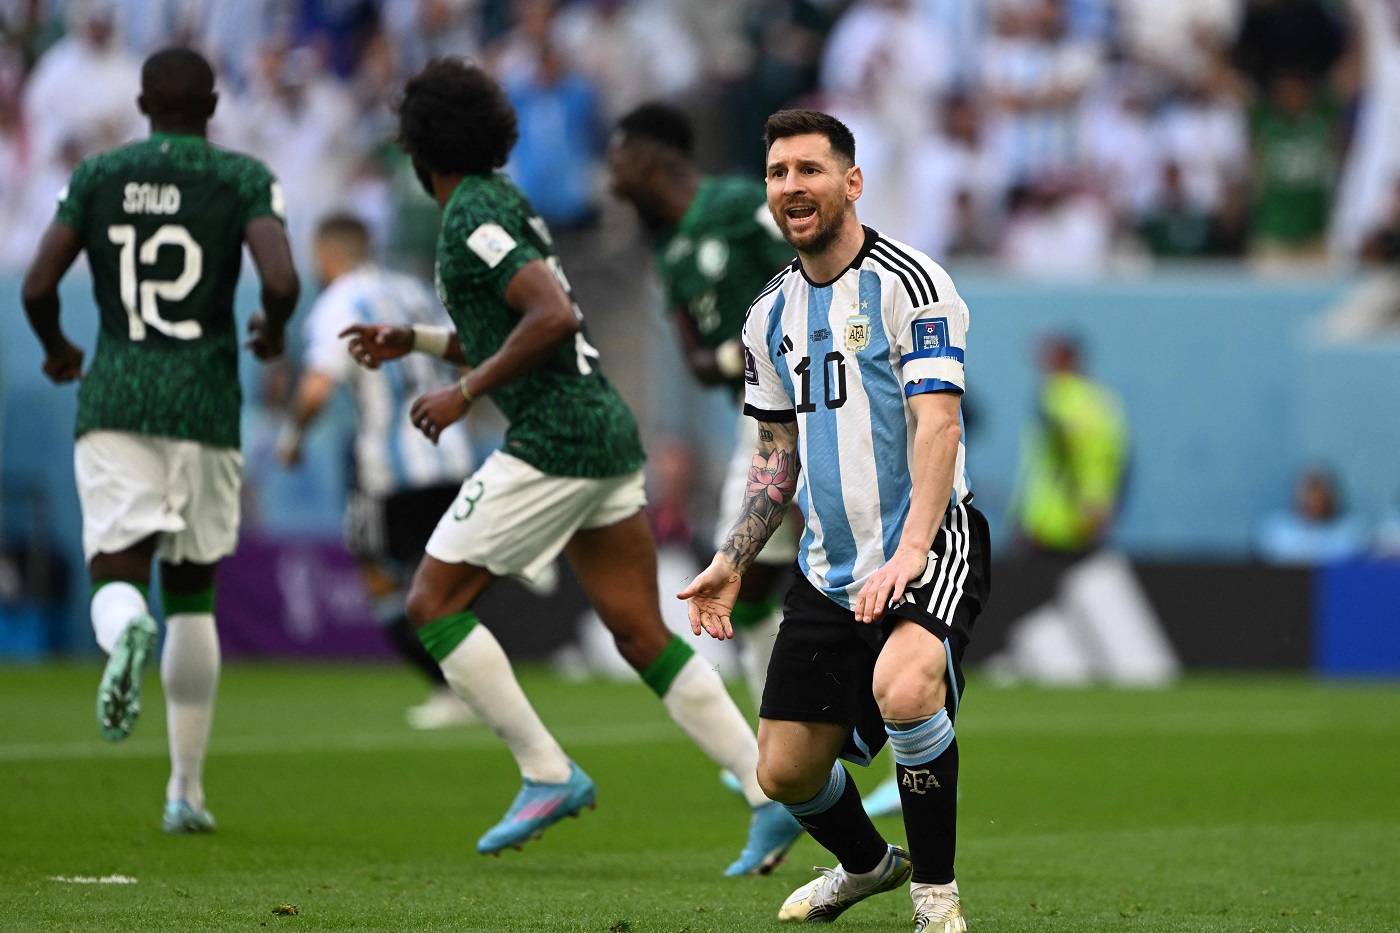 Saudi Arabia’s dream of conquering Messi in the United States.. The Argentine star who caused the crisis